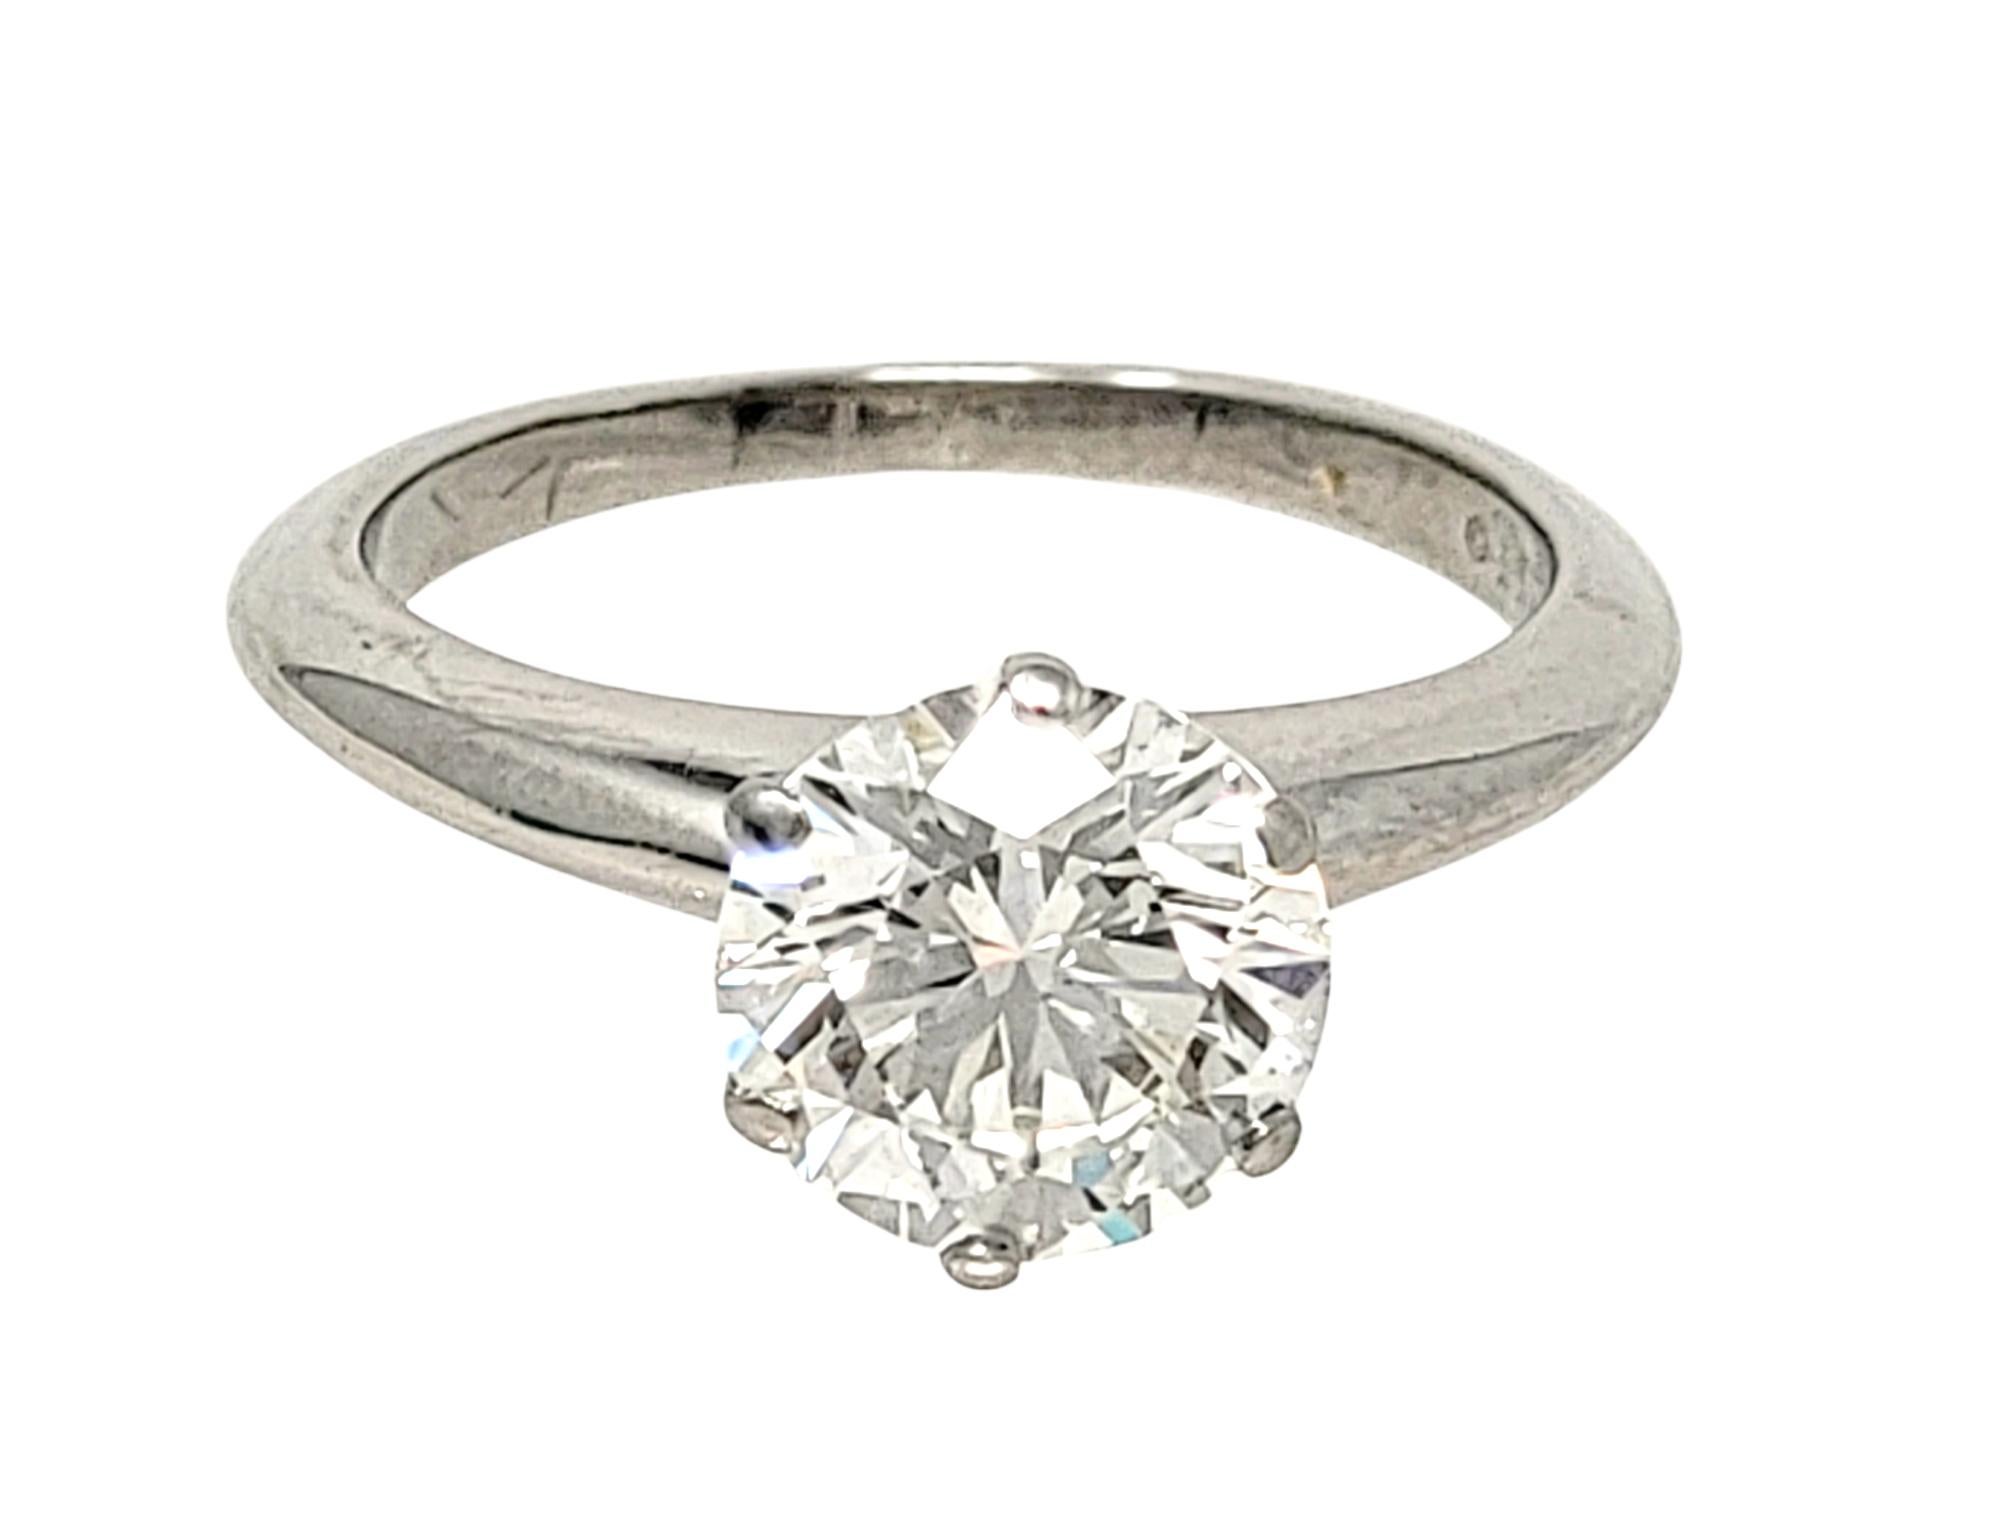 Ring size: 4.25

Say yes to this amazing diamond solitaire engagement ring from Tiffany & Co.! This classic, Tiffany style diamond solitaire ring is the epitome of timeless elegance. The round brilliant, bright icy white diamond sparkles radiantly